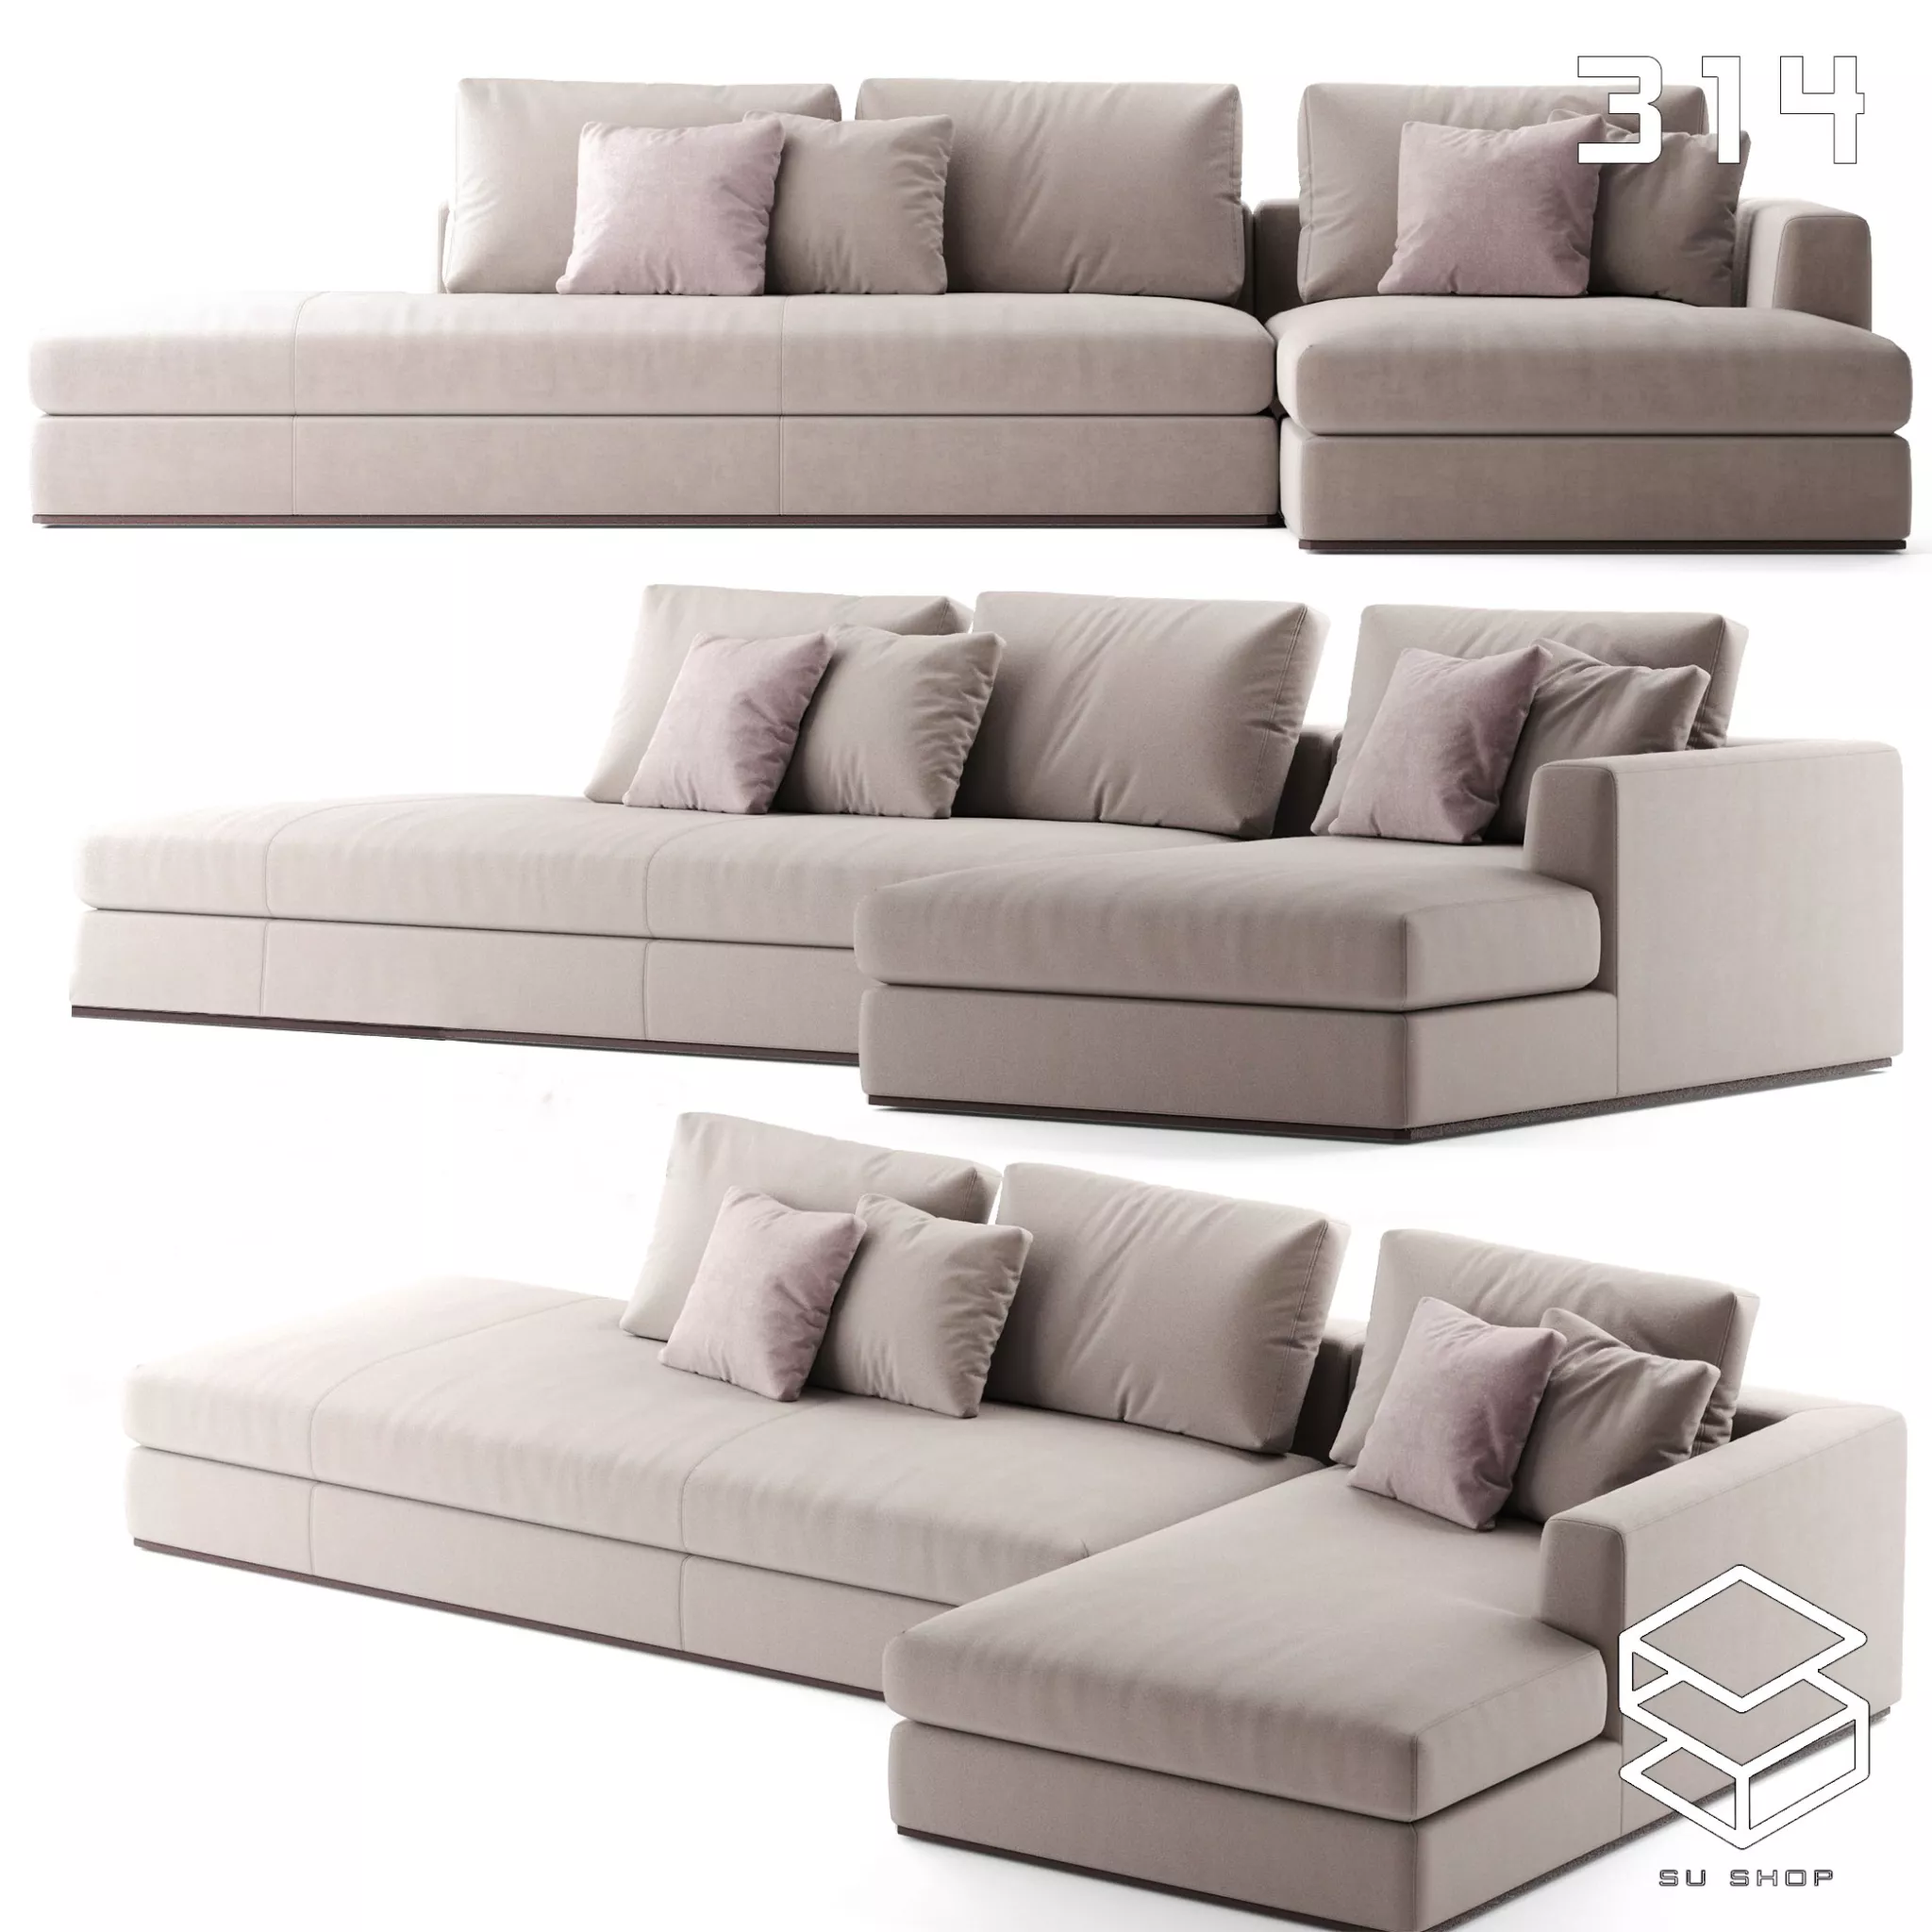 MODERN SOFA - SKETCHUP 3D MODEL - VRAY OR ENSCAPE - ID13624